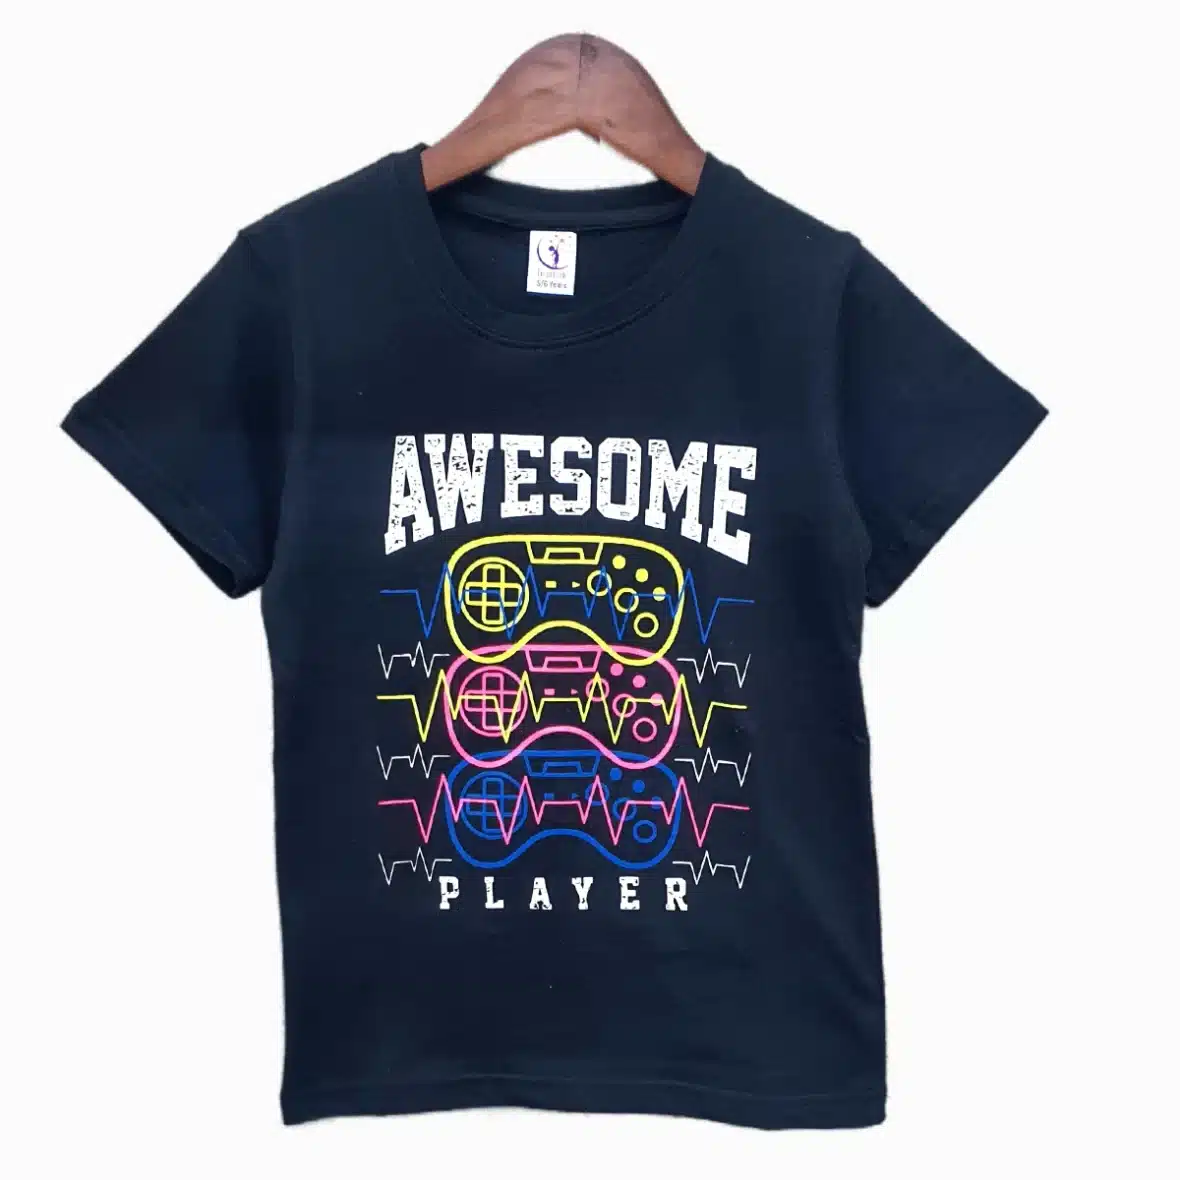 Awesome Player Summer Tee